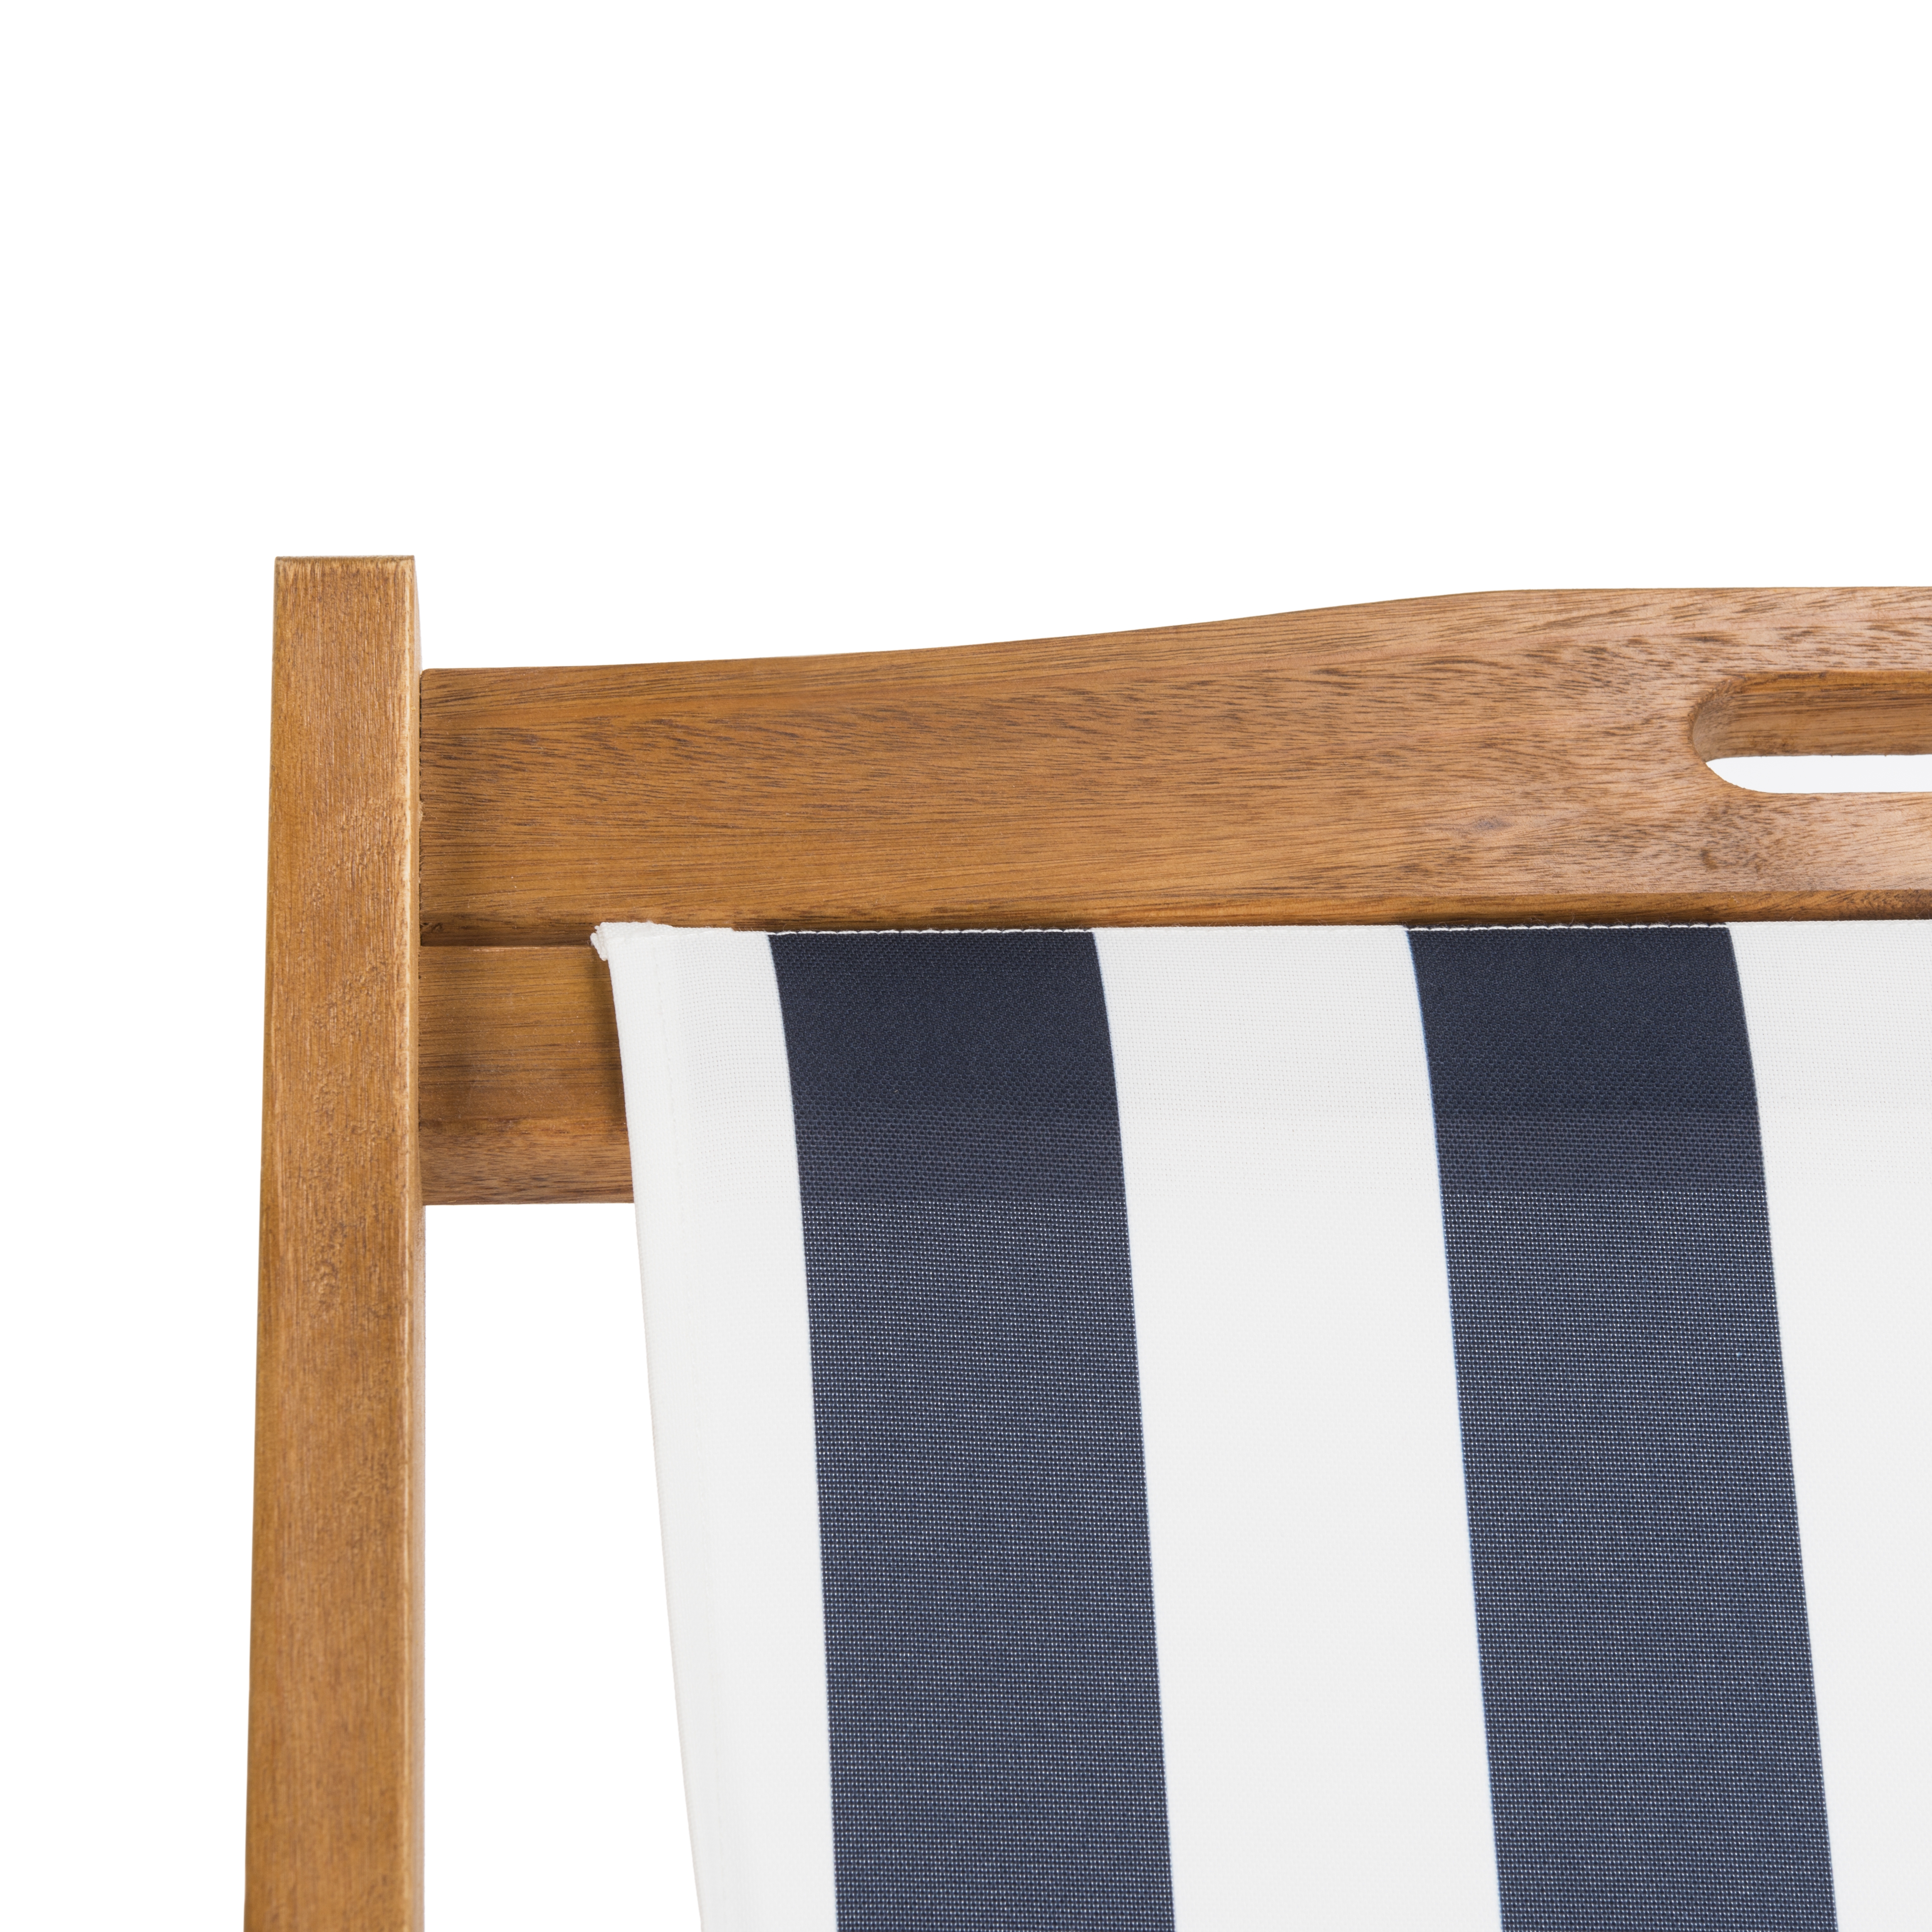 Loren Foldable Sling Chair - Natural/Navy/White - Arlo Home - Image 5